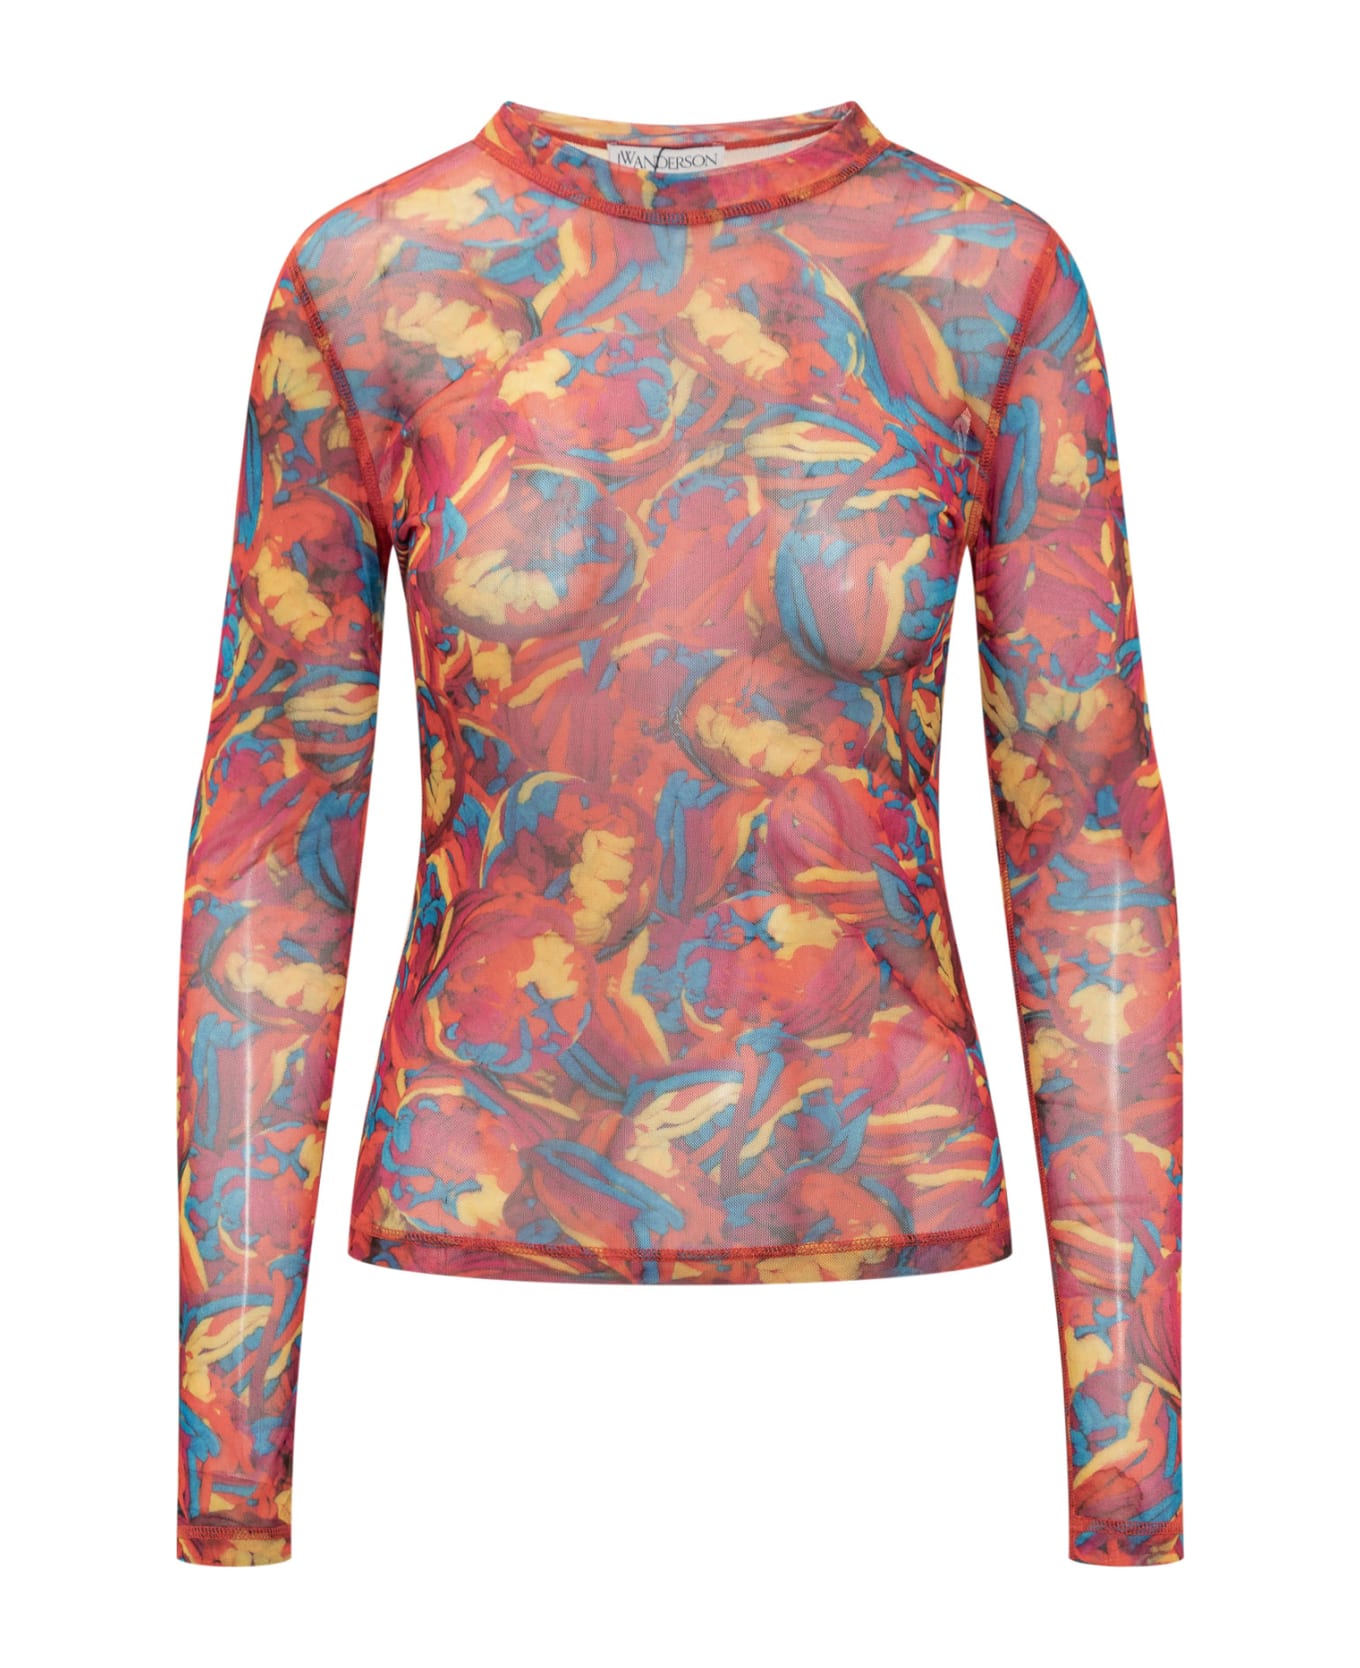 J.W. Anderson Abstract Pattern Print Long-sleeved T-shirt - RED/MULTI